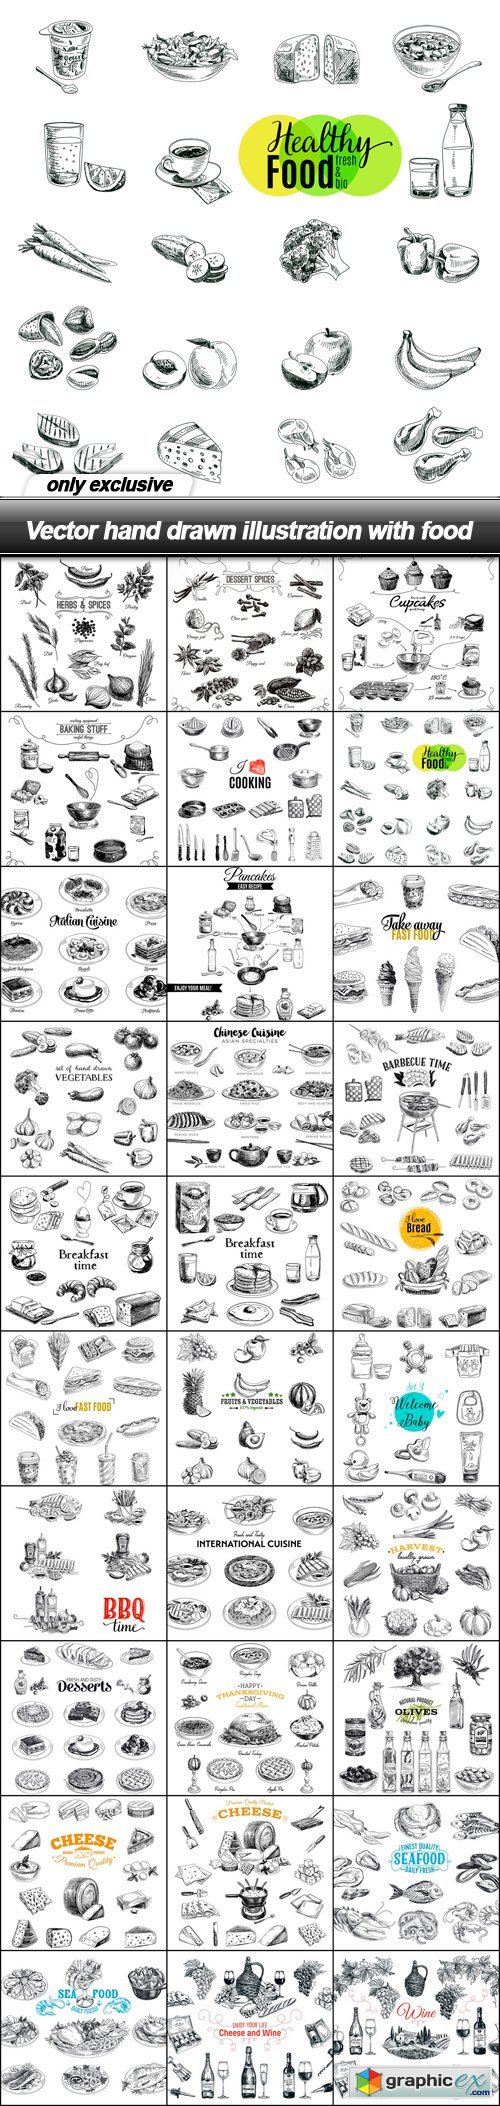 Hand drawn illustration with food - 30 EPS